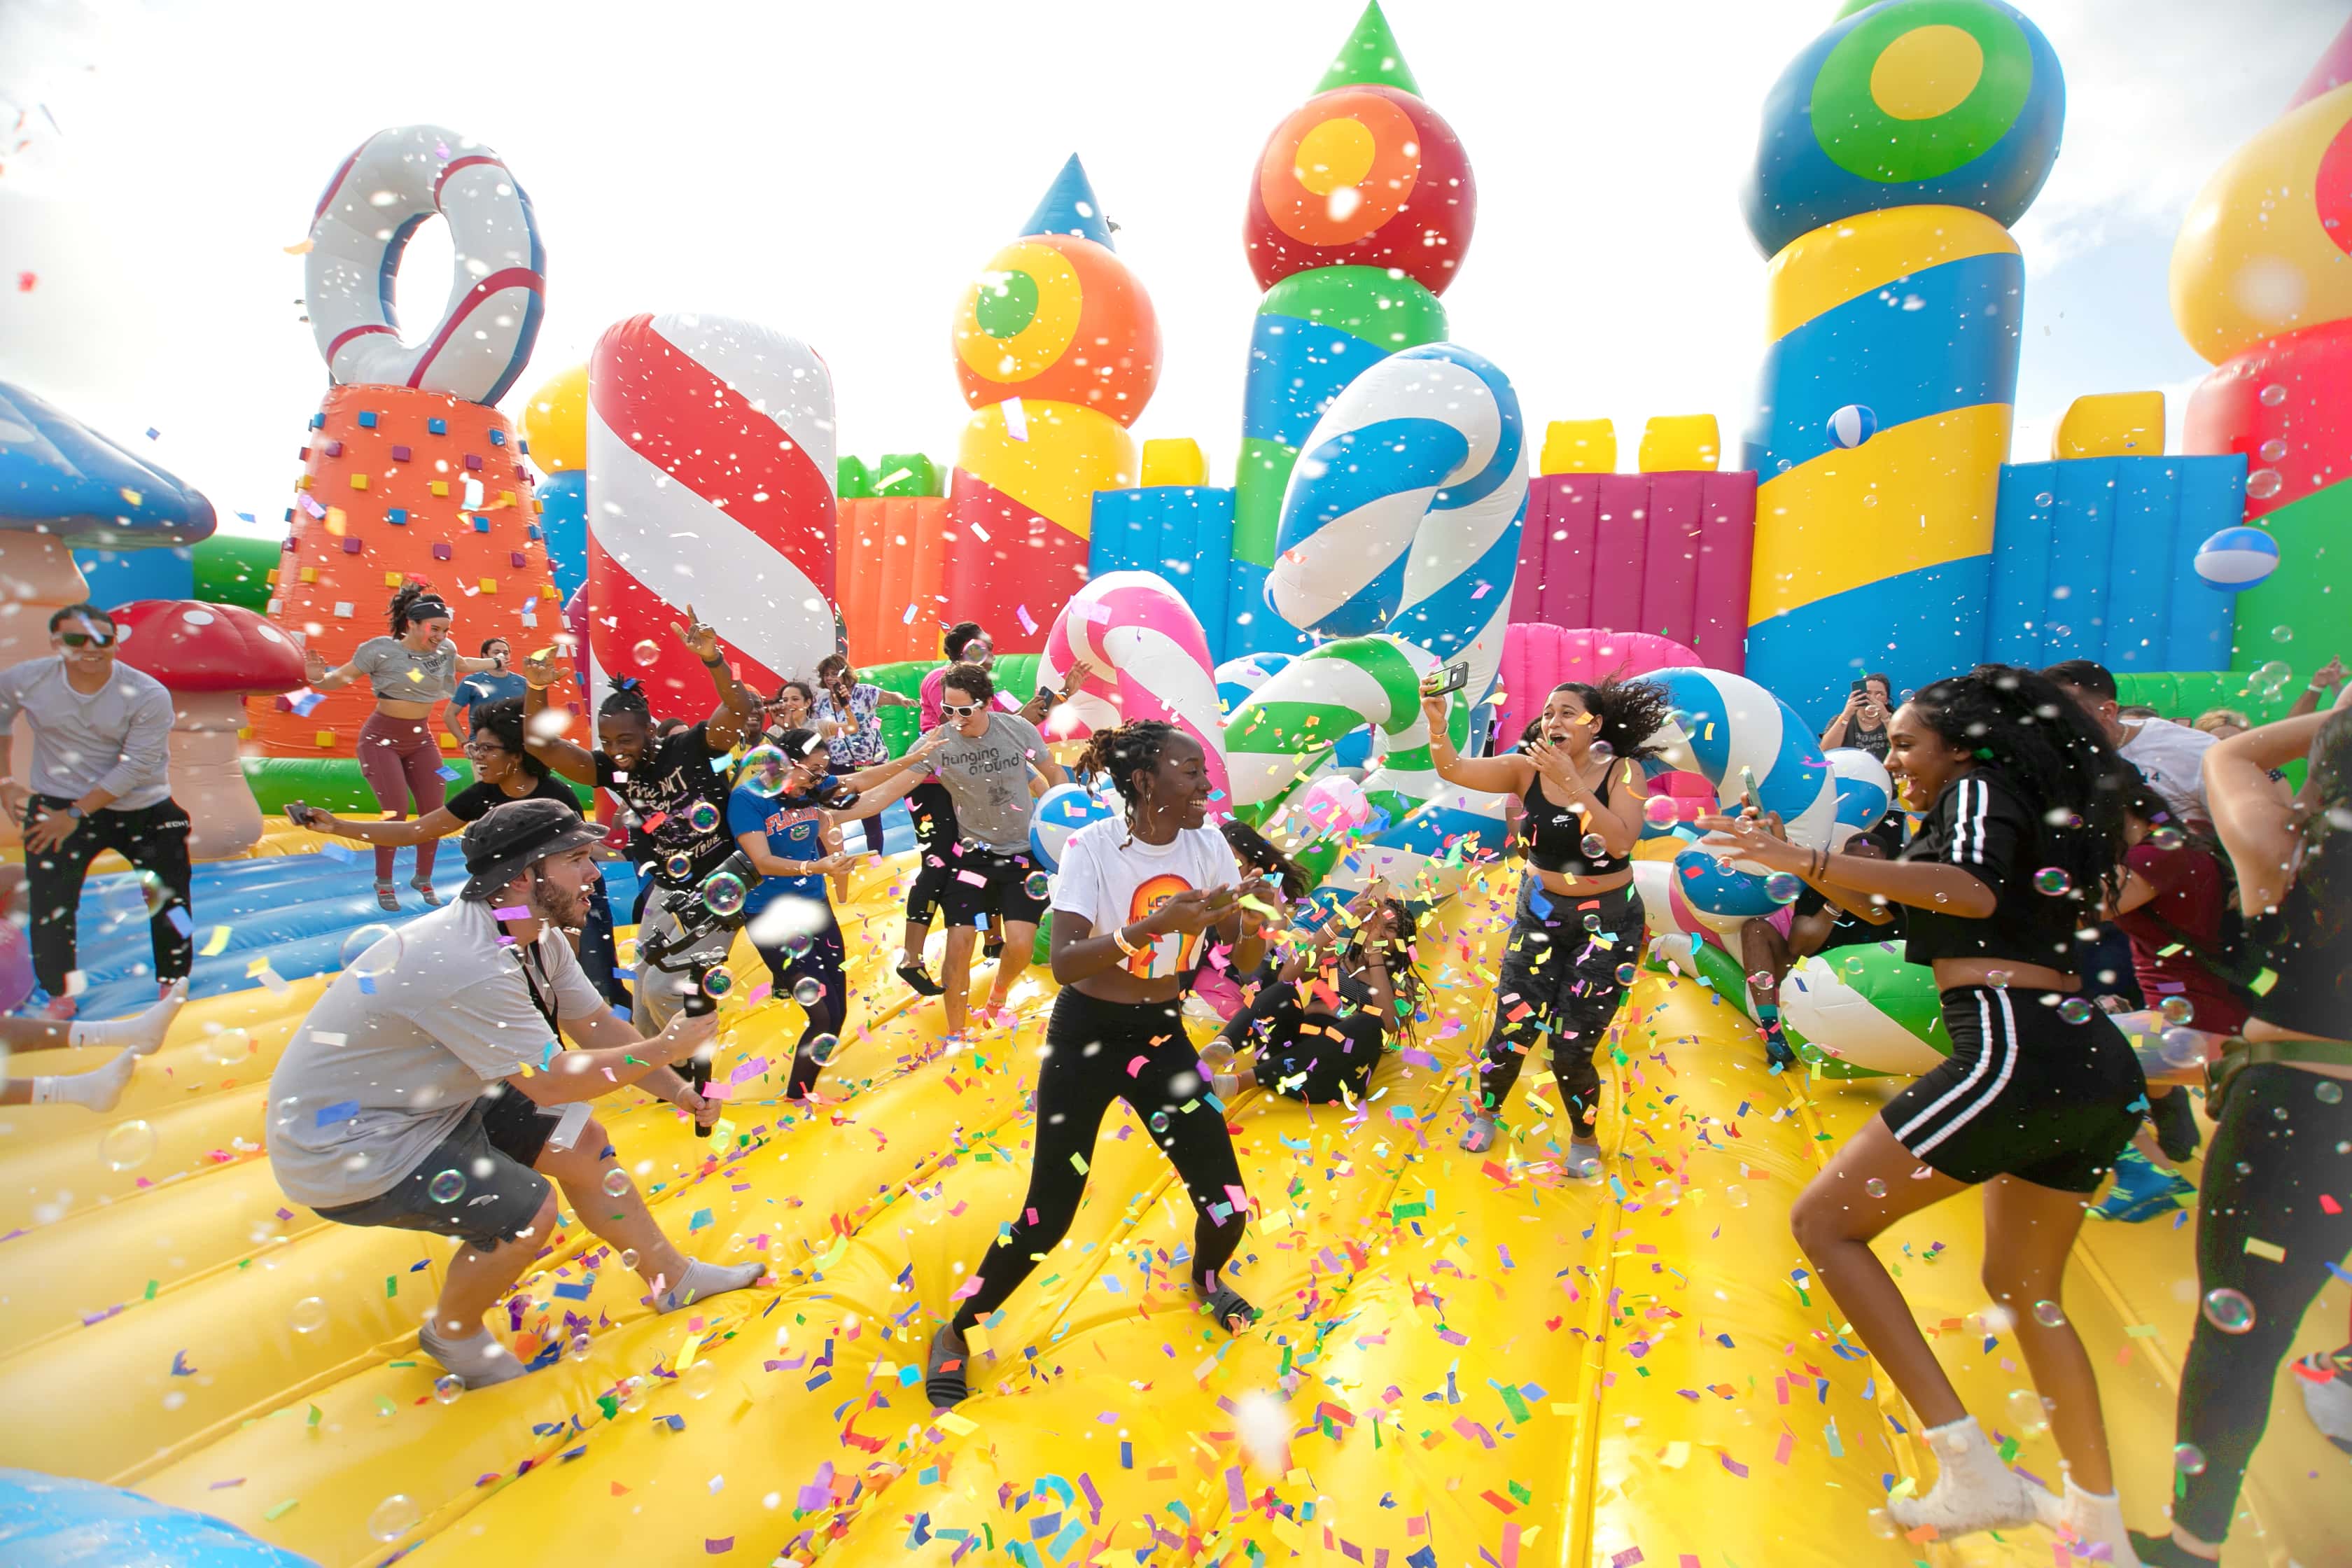 World's biggest bouncy castle' coming to Metro Vancouver